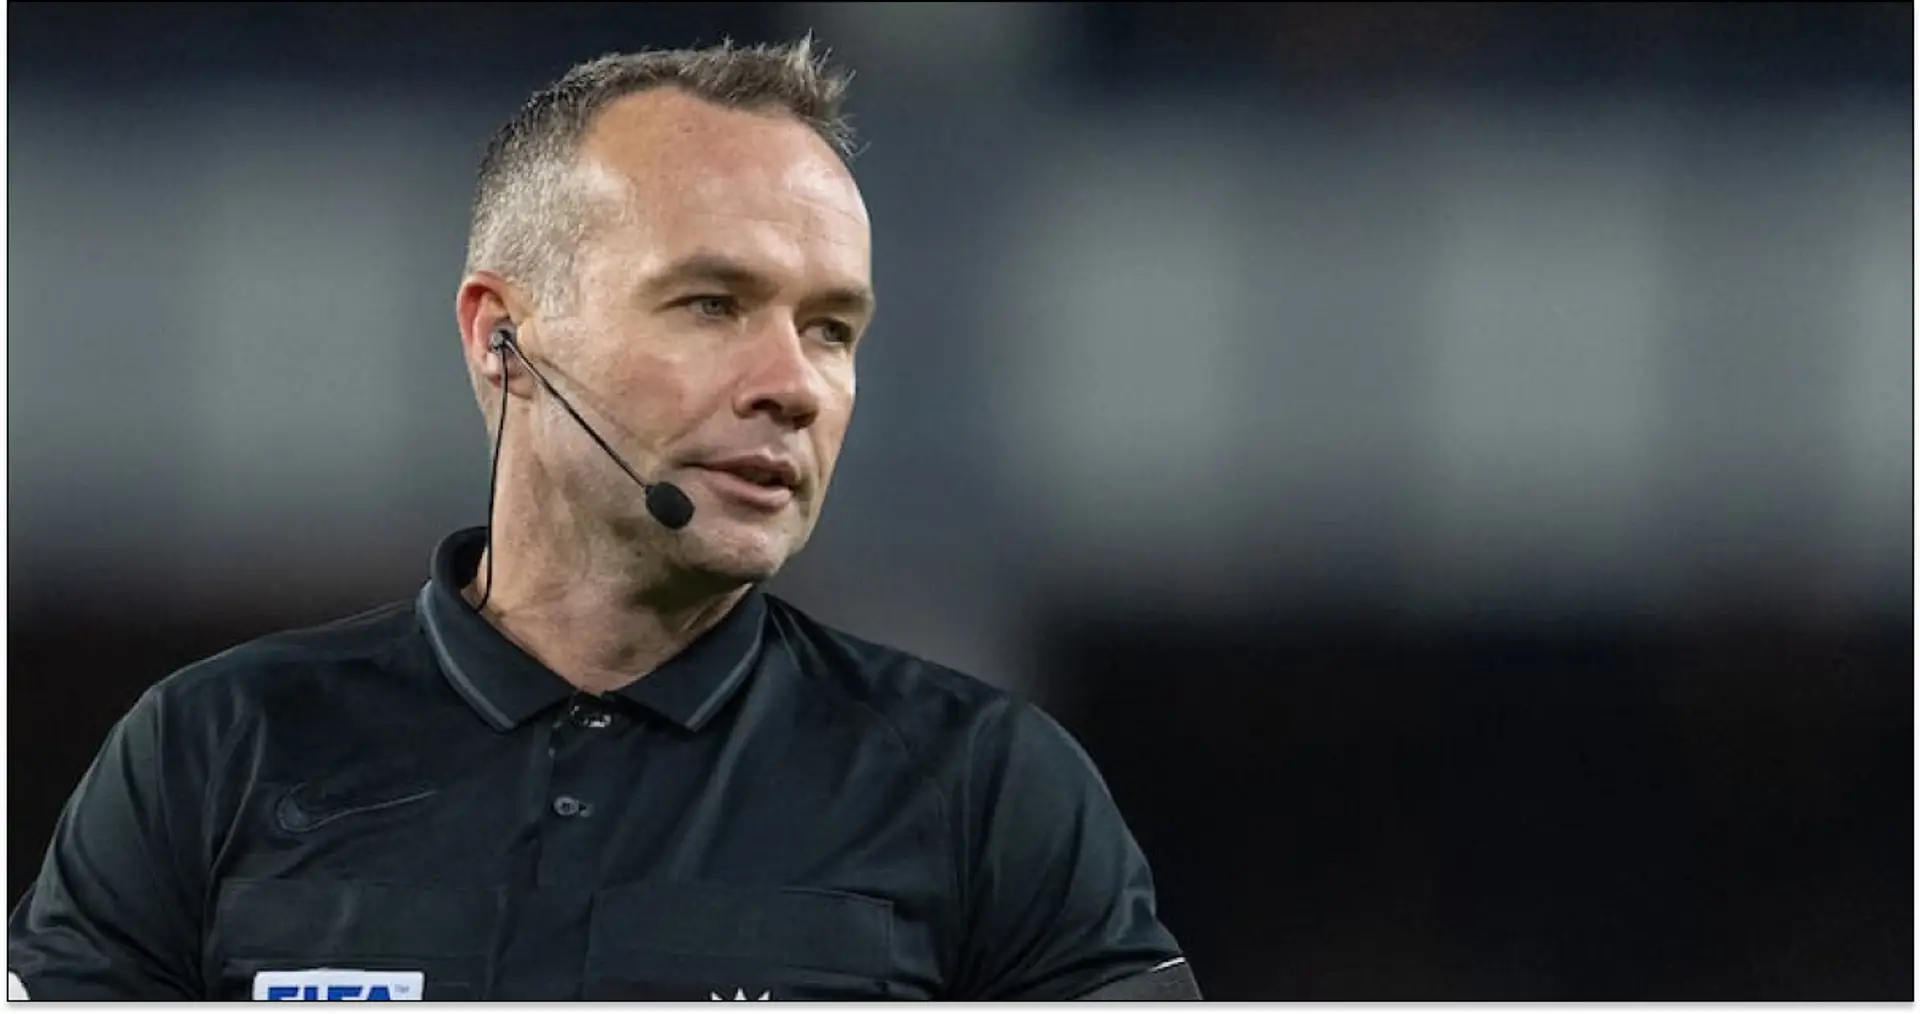 'Why should officials get away with committing such impactful errors?': FA told to drop Paul Tierney after Mac Allister red card mistake